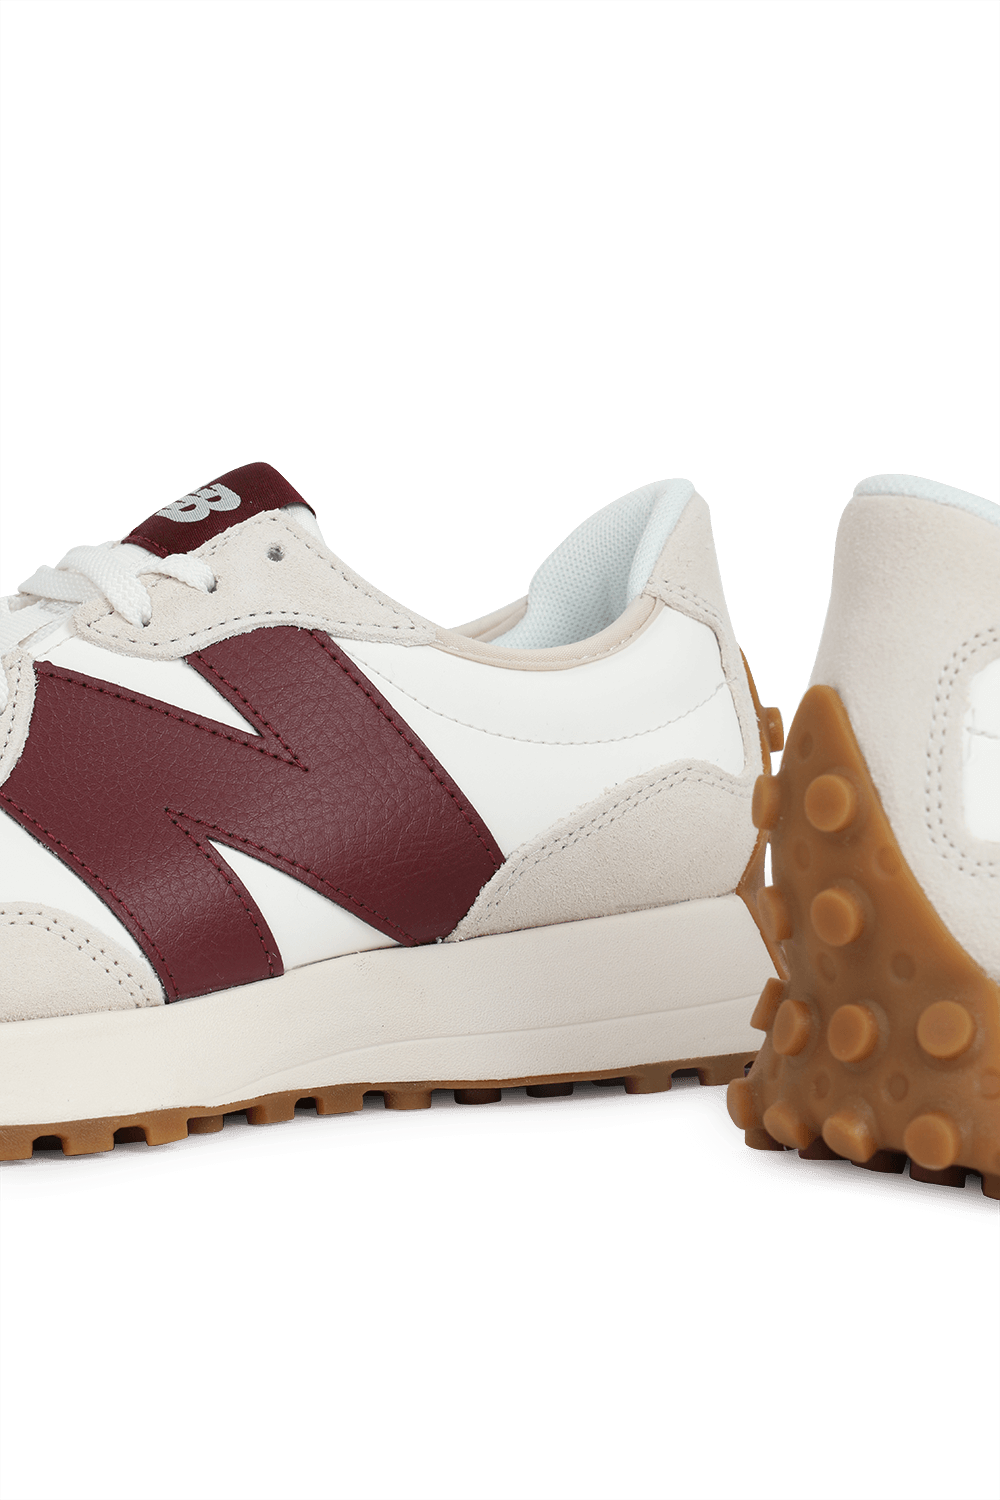 327 Sneakers in Burgundy and Grey NEW BALANCE